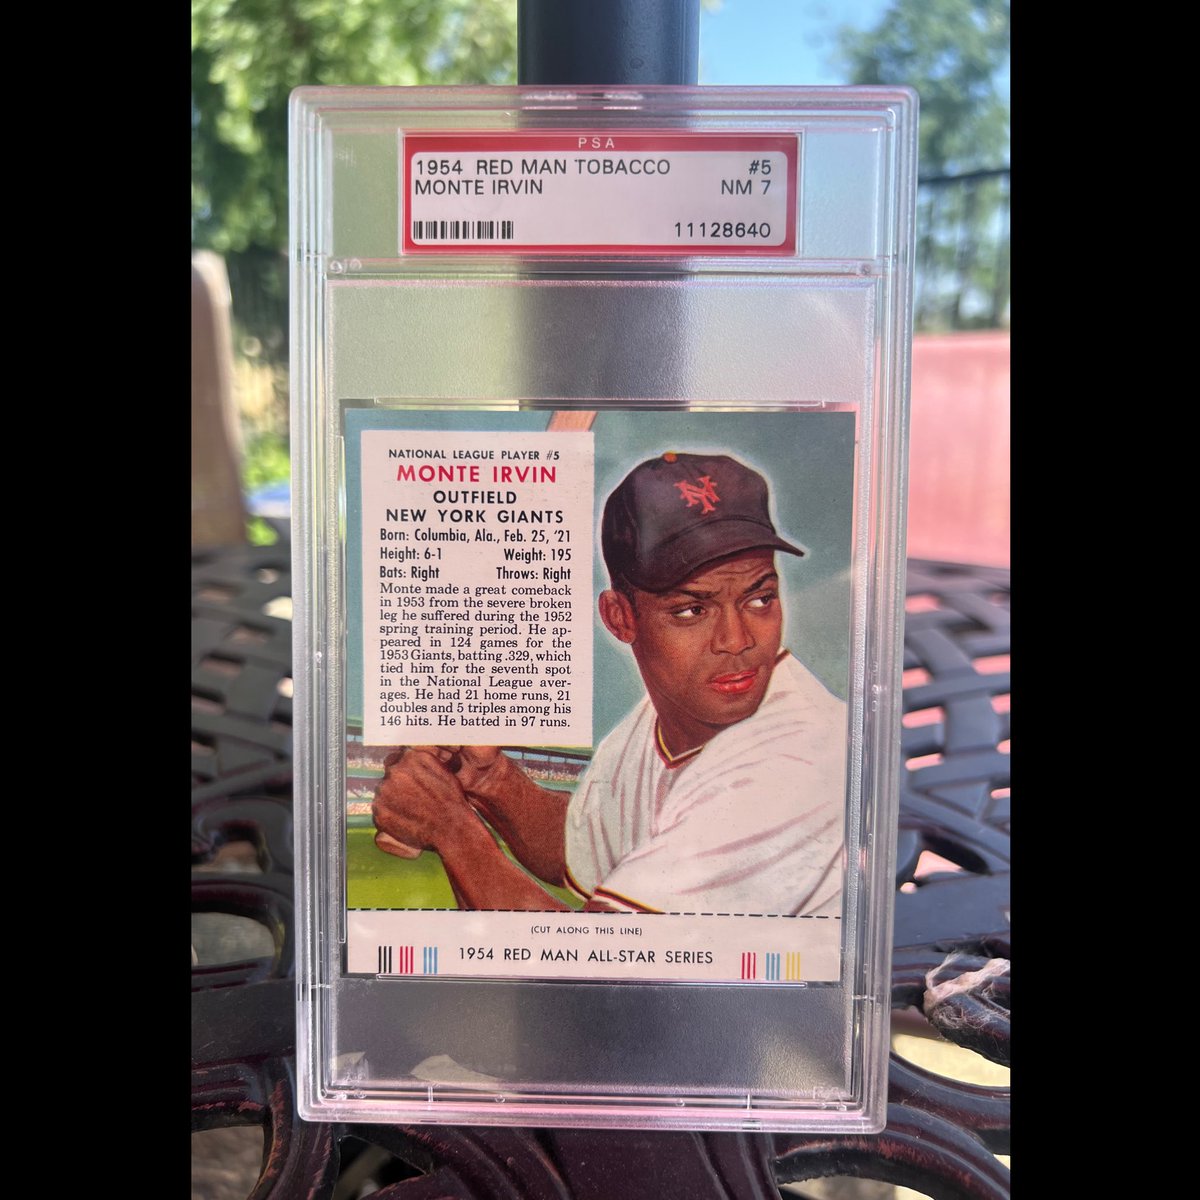 “…in an oppressed group being sent to Europe to fight for the oppressed people in other countries. Irvin's military service left him with ringing in the ears, which affected his coordination.”-wiki

#thehobby #cardchat #mlbhof #sportscards #monteirvin #baseballcards #vintagewax